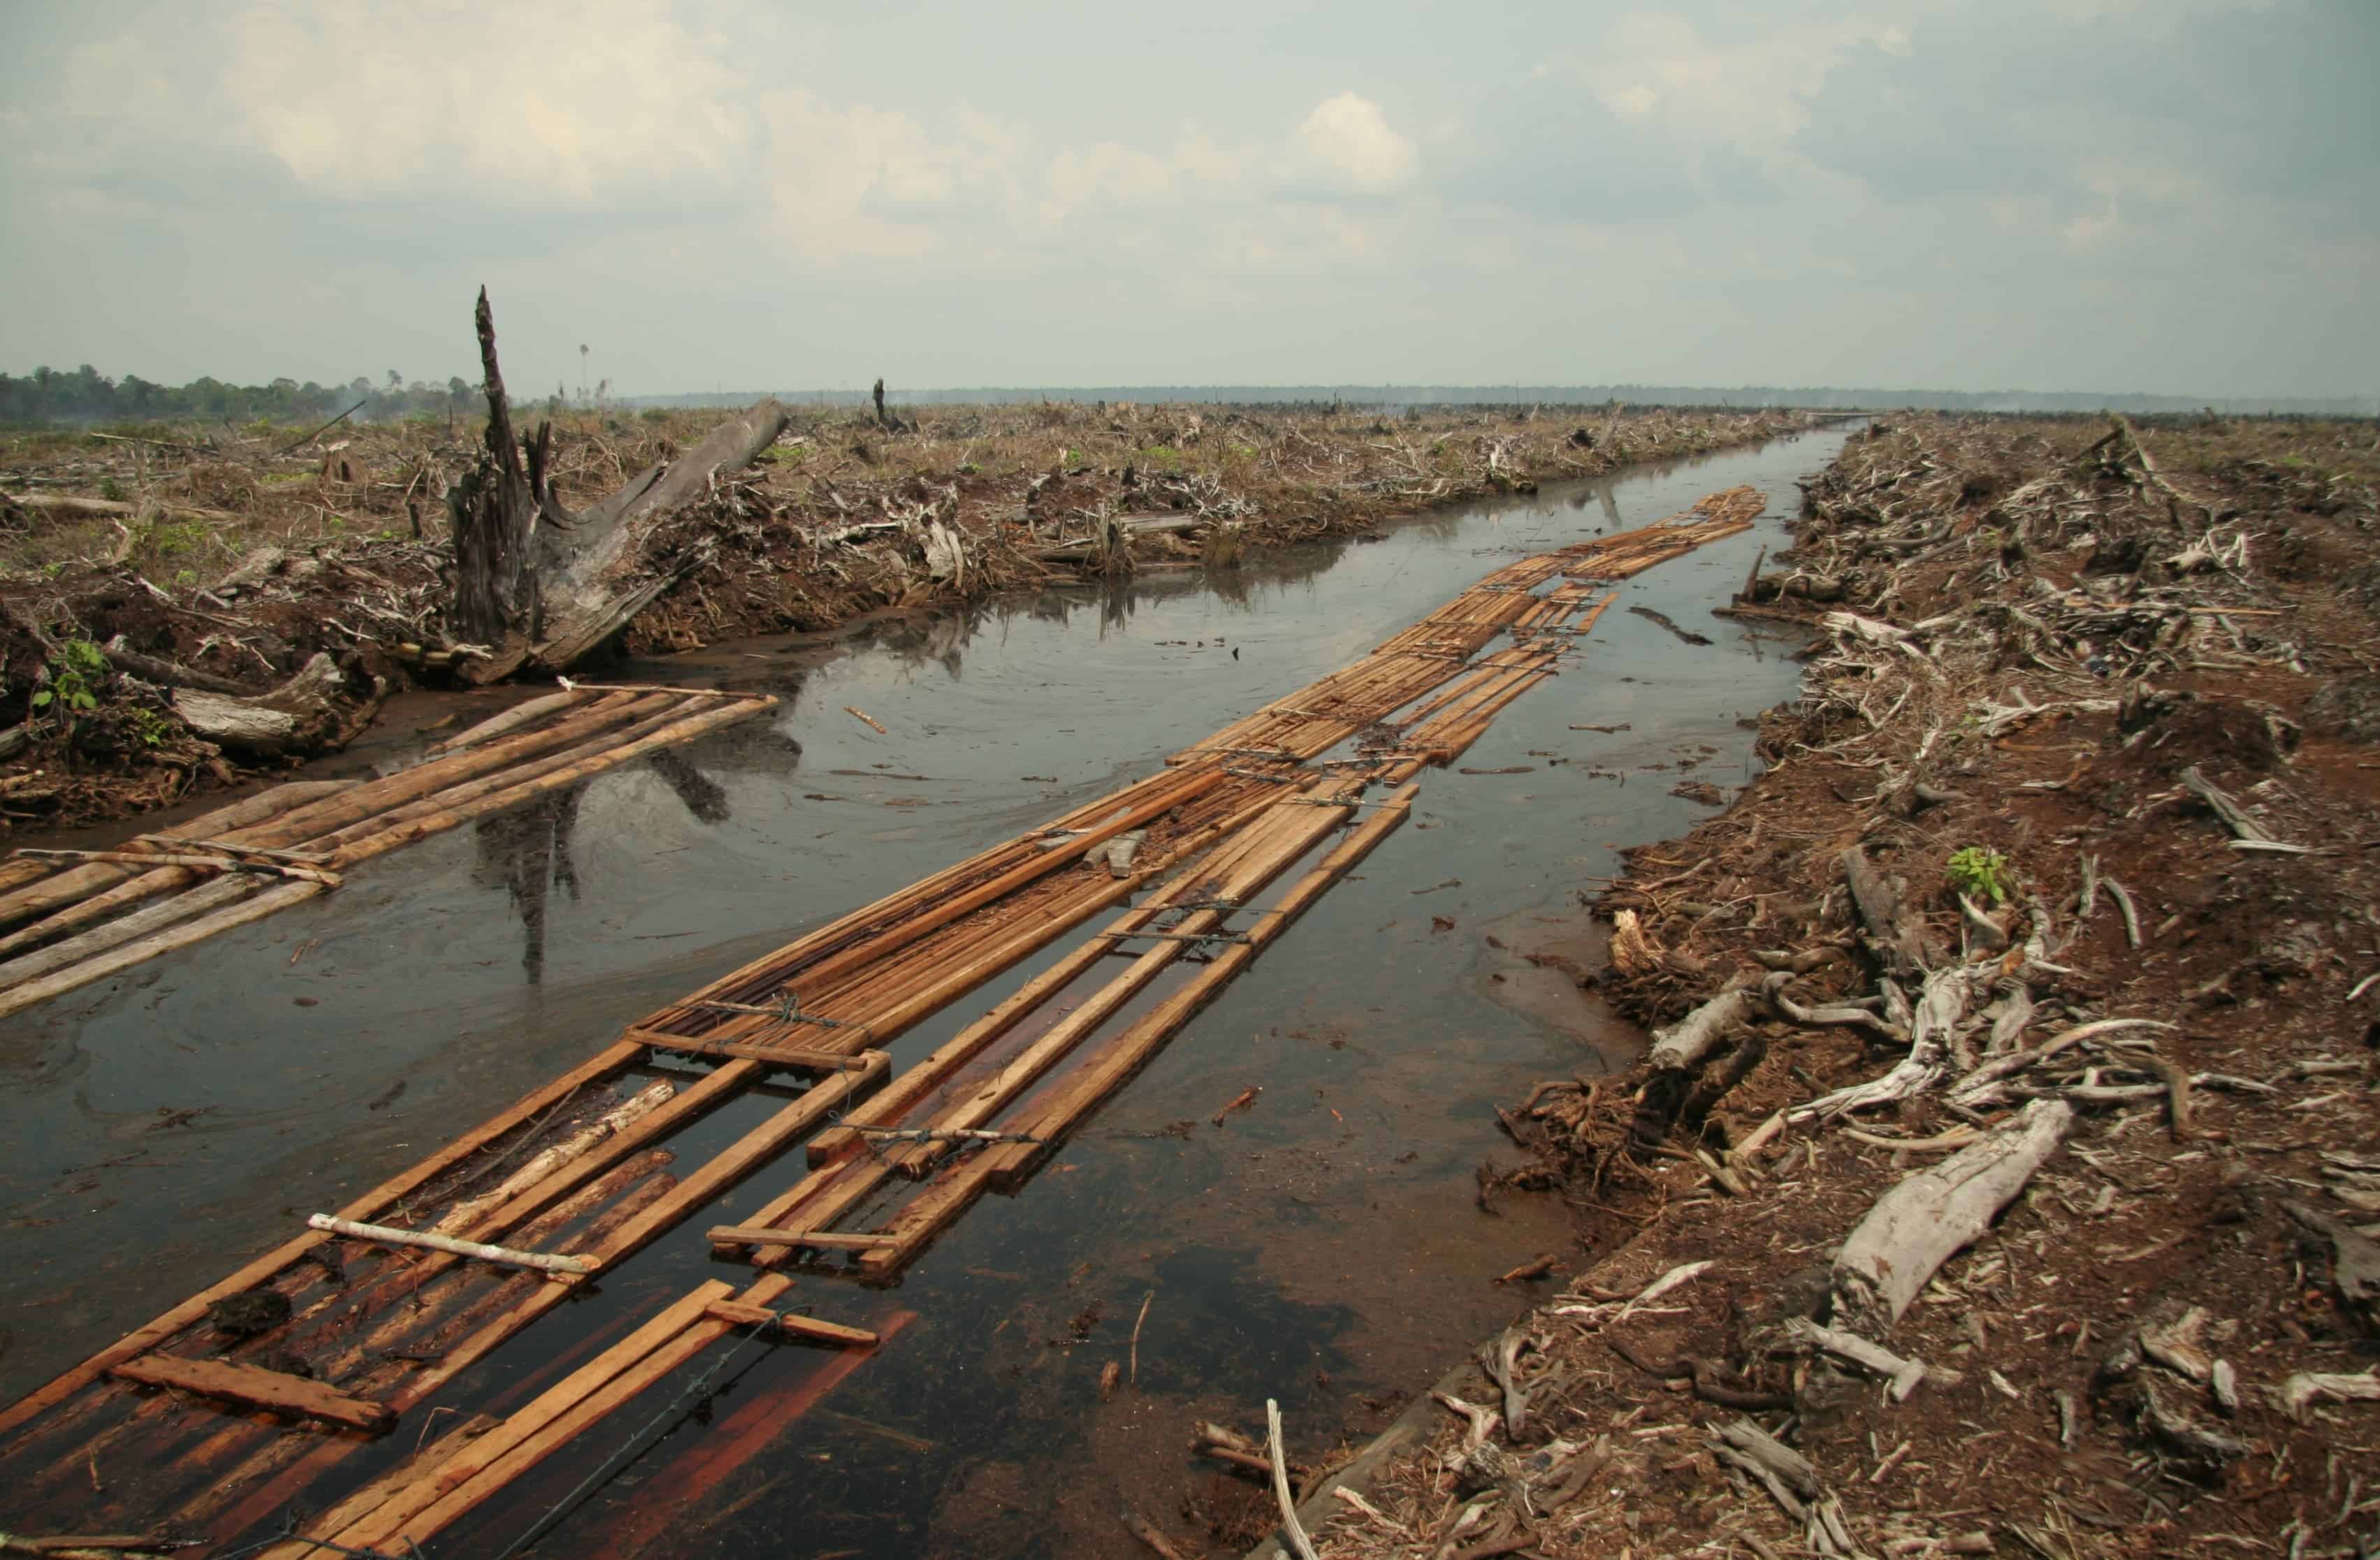 The ICC will now analyze environmental crimes, including illegal deforestation. Photo by Waks